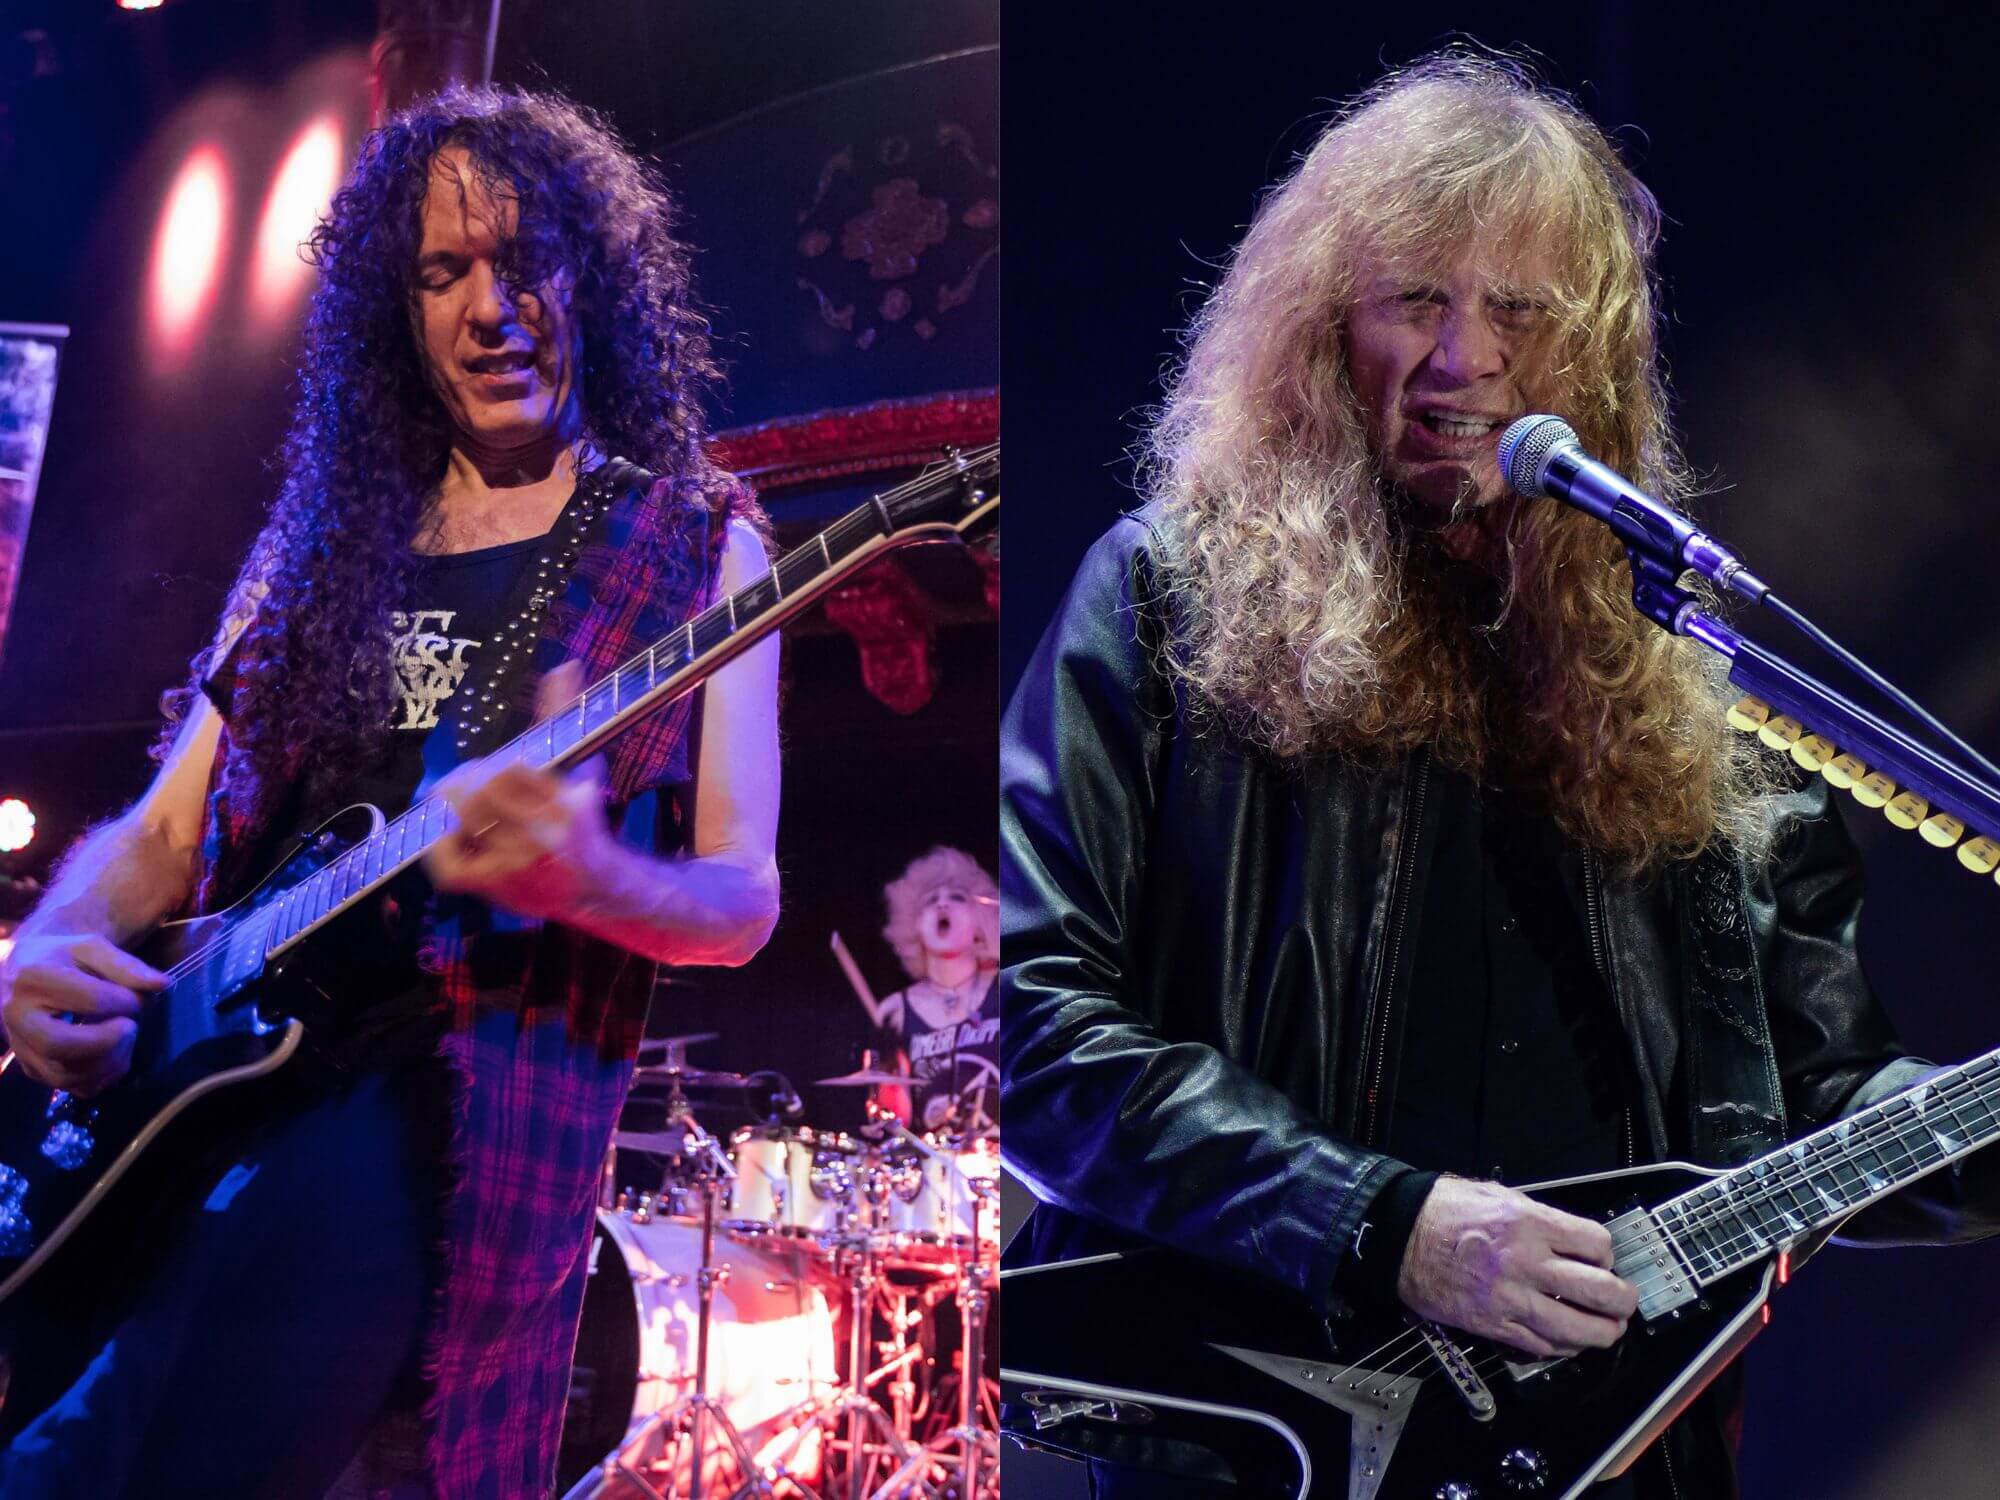 Marty Friedman on Dave Mustaine and Megadeth reunion